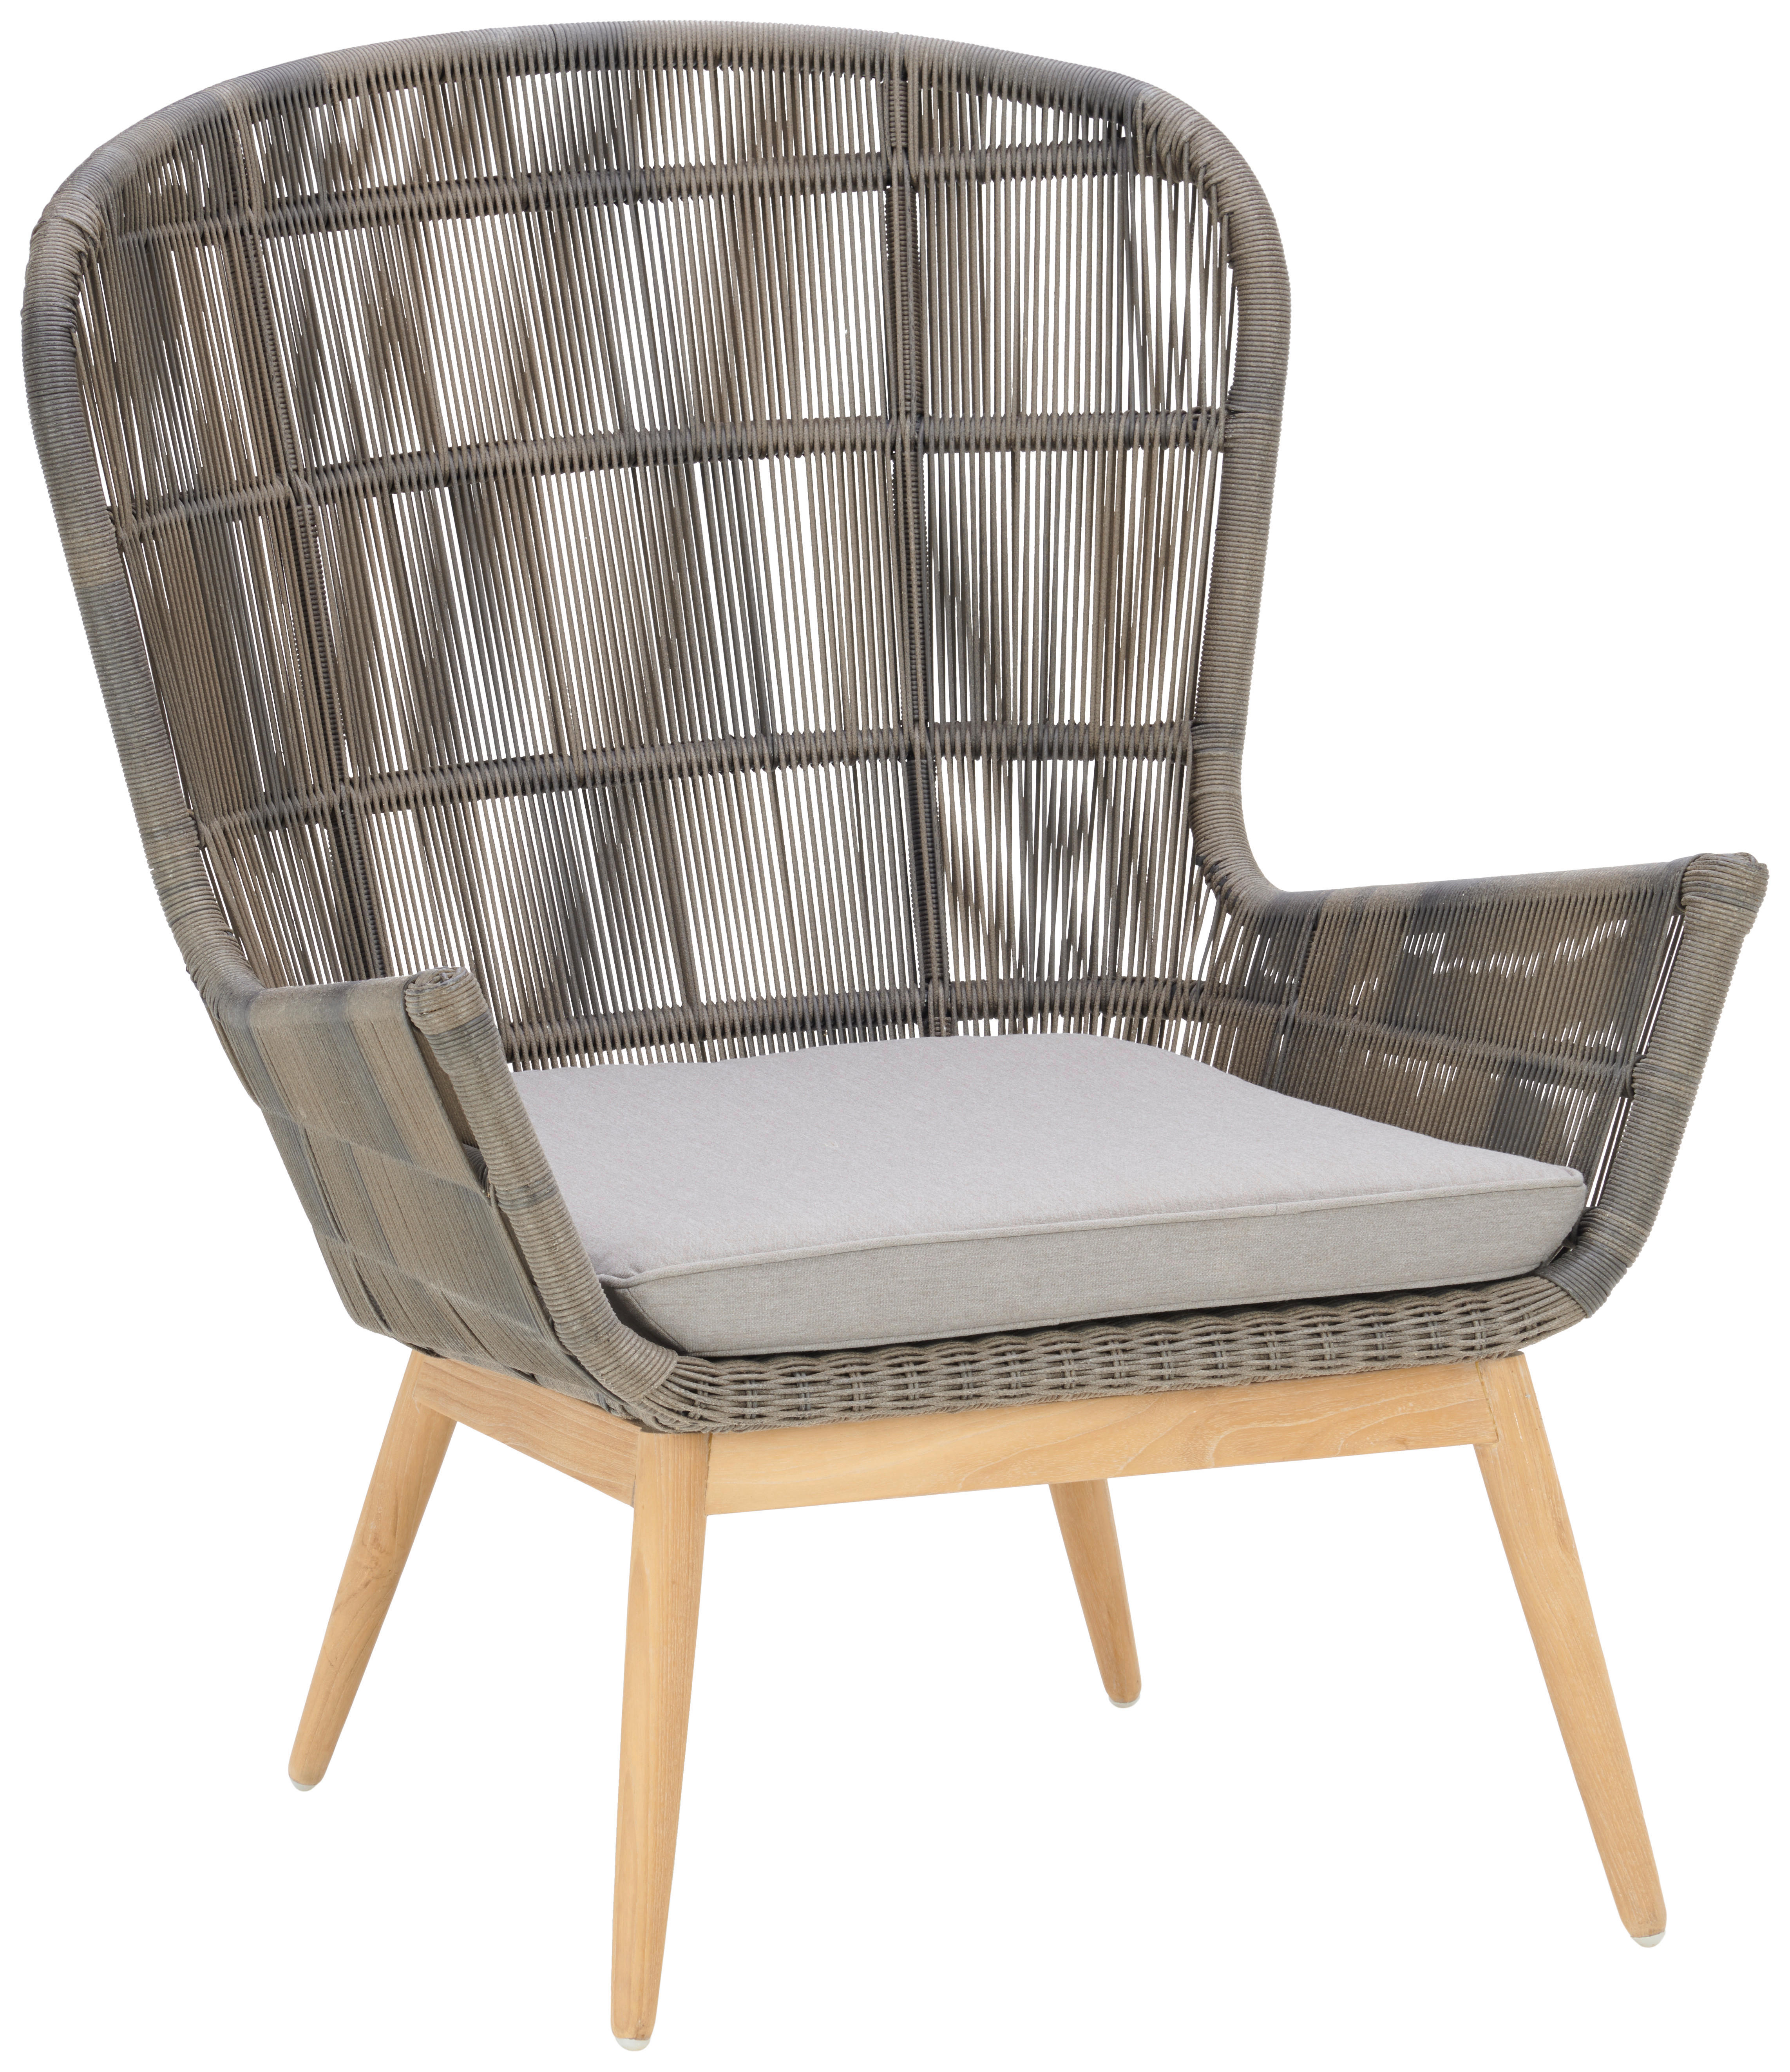 Loungesessel outdoor online Holz shoppen